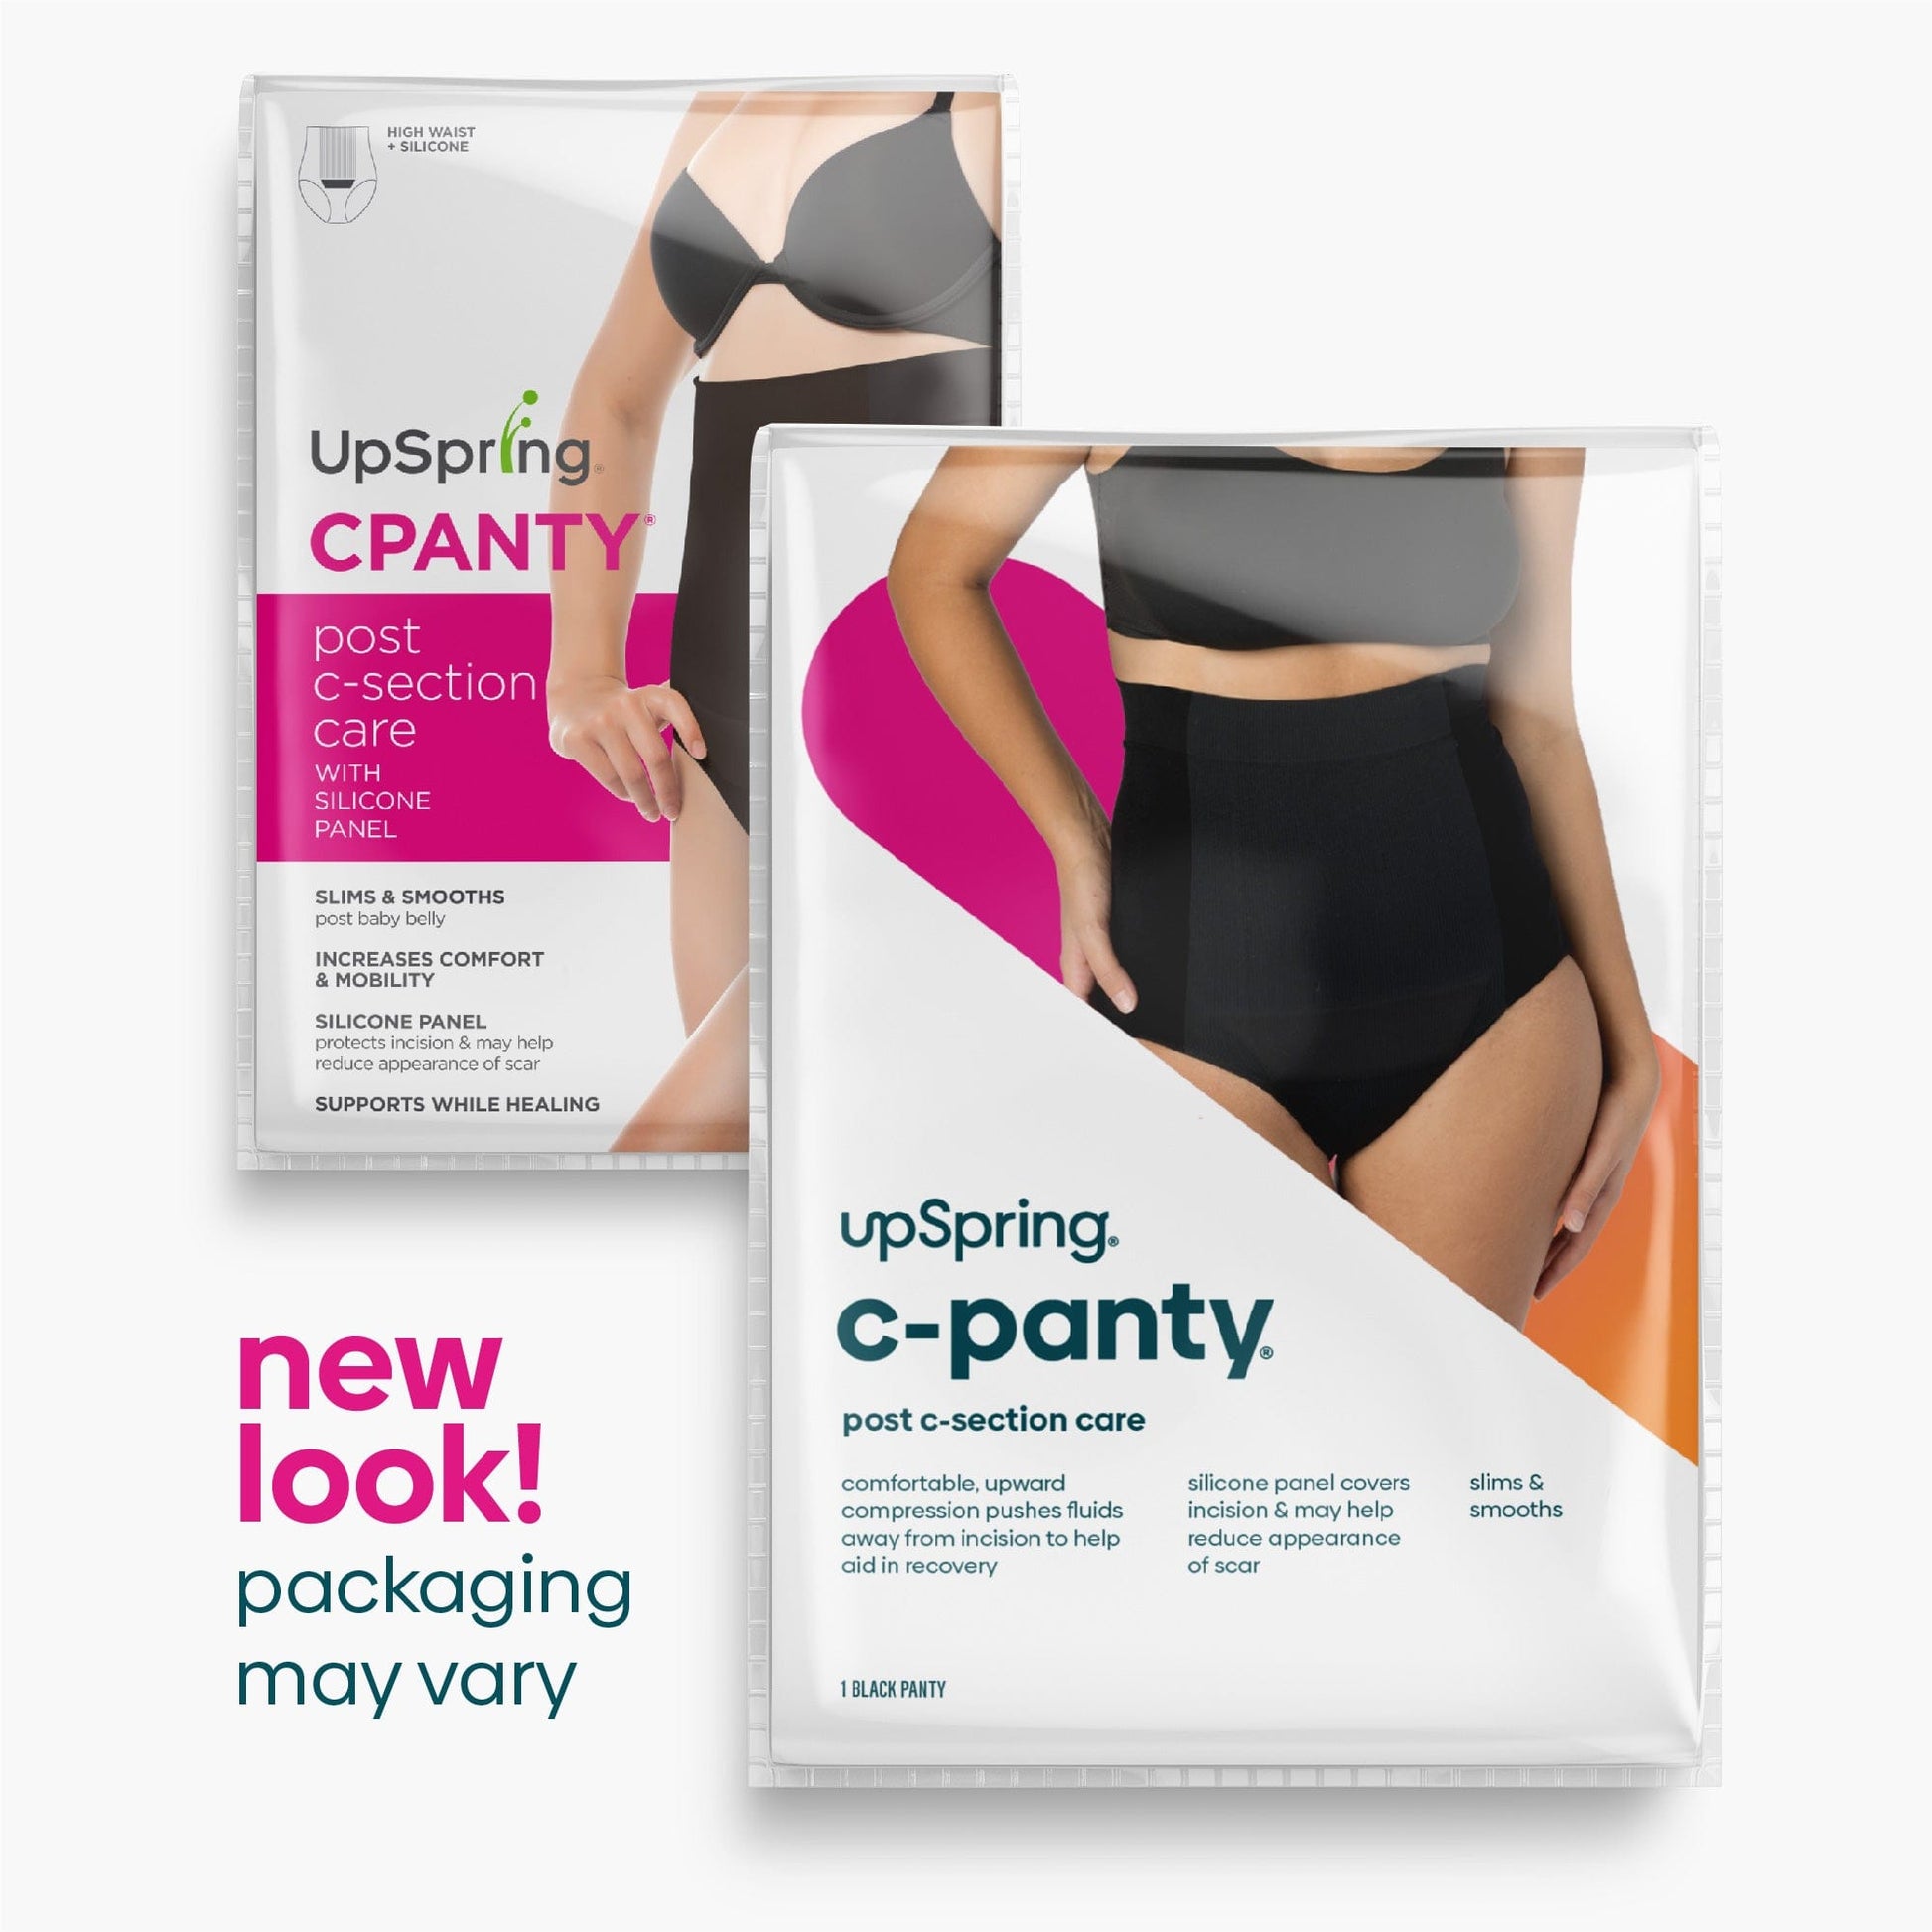 Two packages of C Panty, one with the old packaging and one with the new packaging